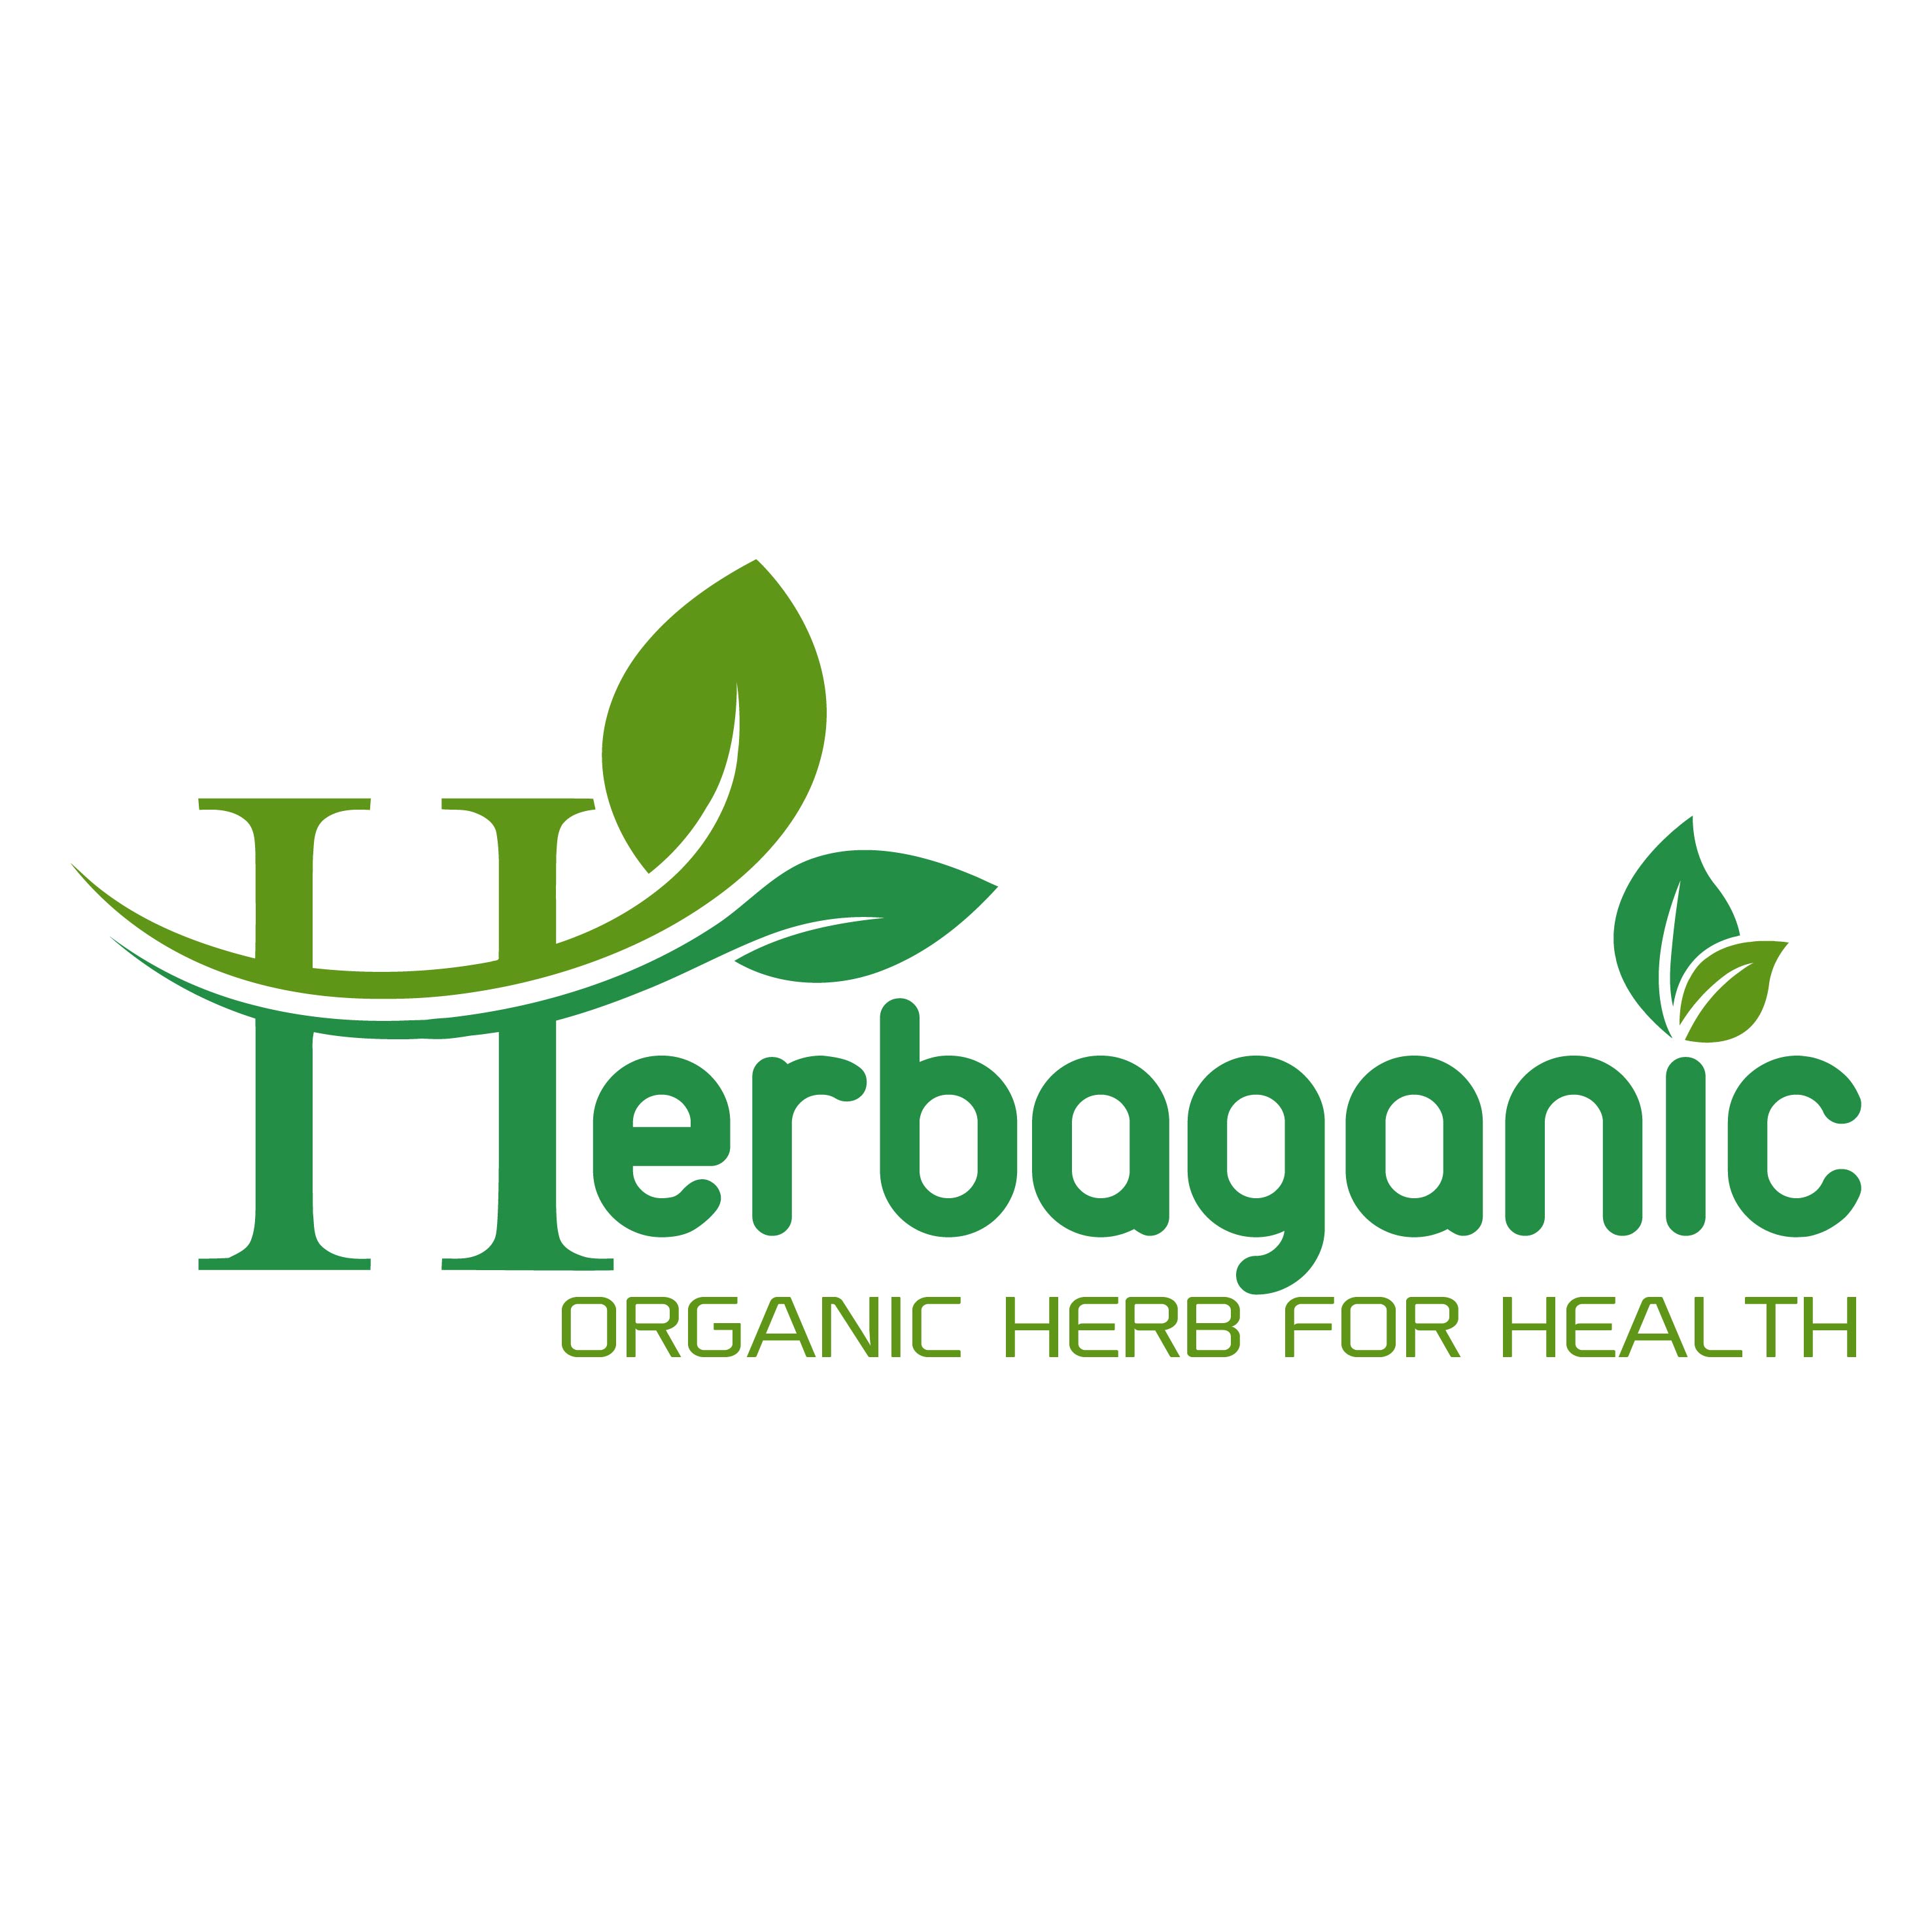 Herbaganic Official Store